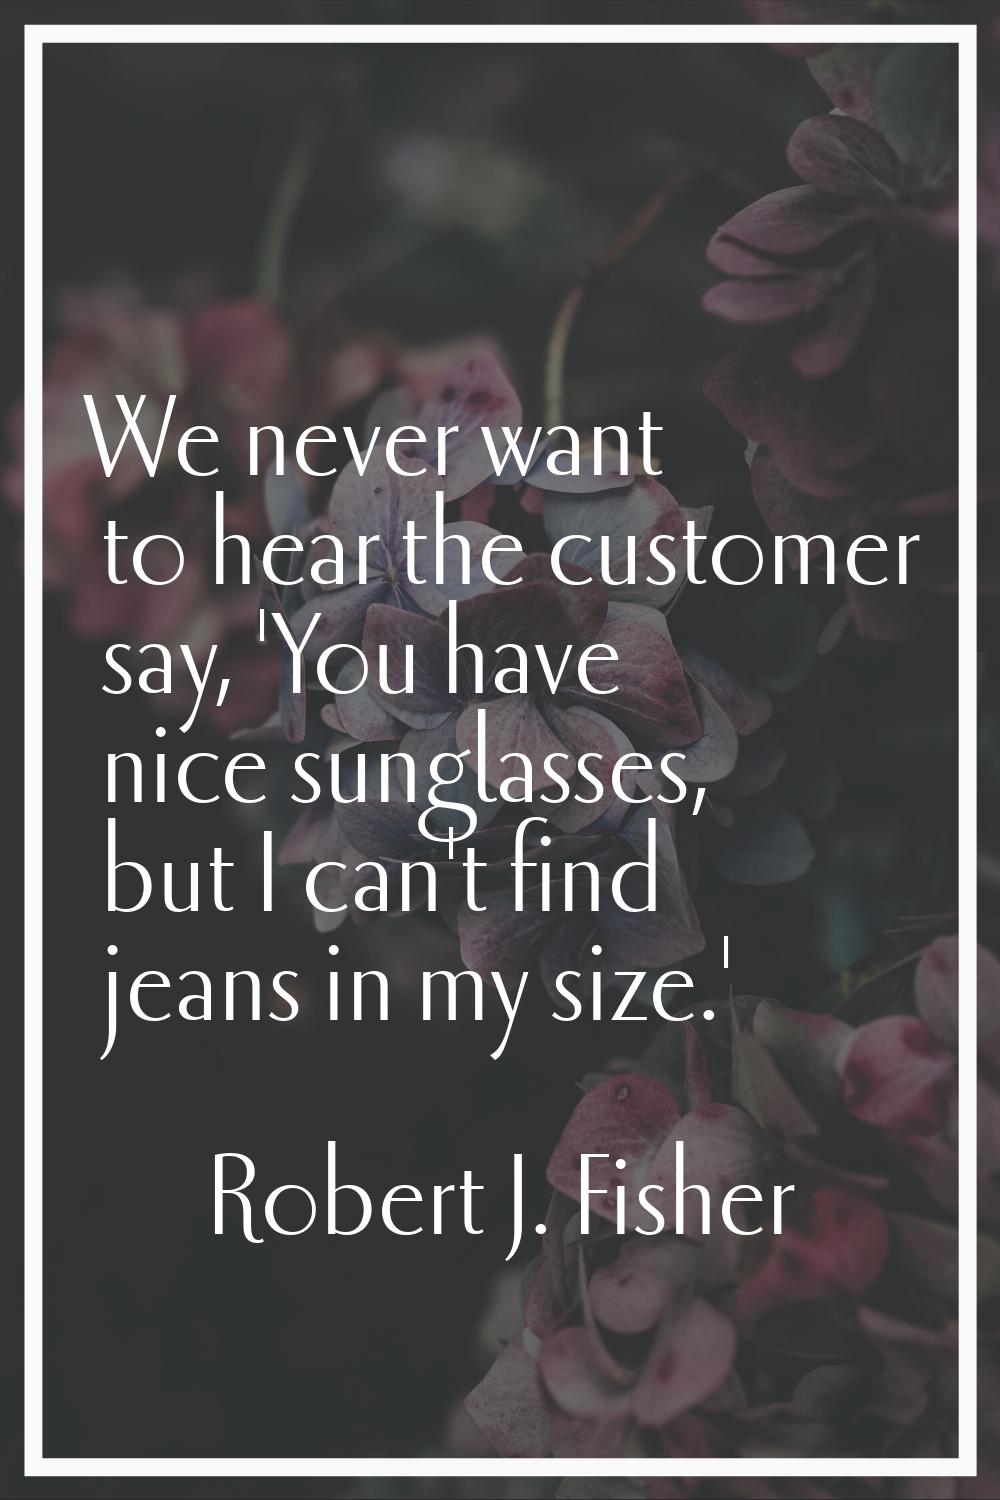 We never want to hear the customer say, 'You have nice sunglasses, but I can't find jeans in my siz